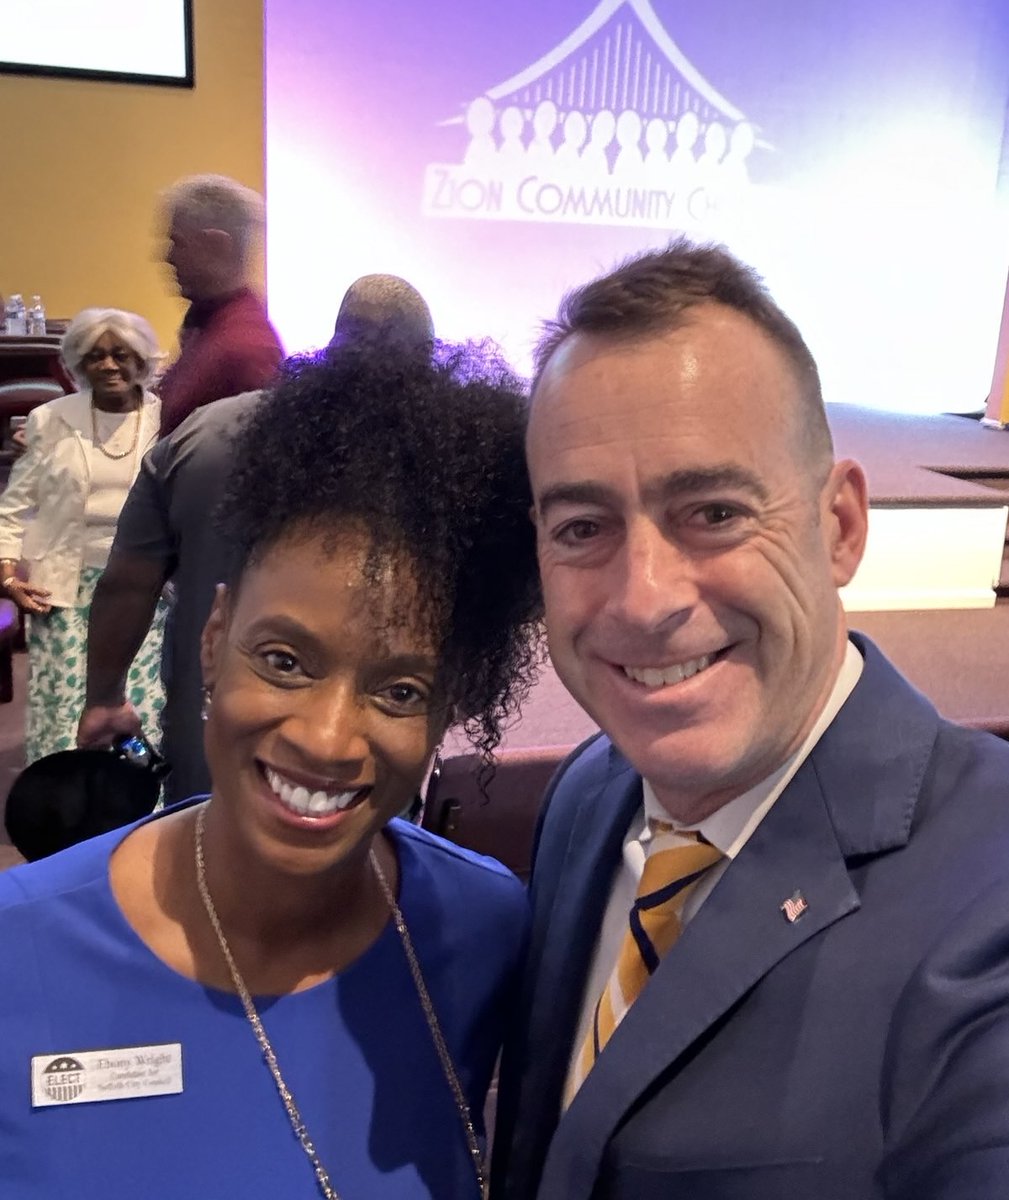 It was great to attend the Zion Church Community Day! Thank you to Dr. Ben Fitzgerald and all the wonderful folks who welcomed me and put together this fantastic event! And thank you to City Council Candidate Ebony Wright for joining me! #VA02